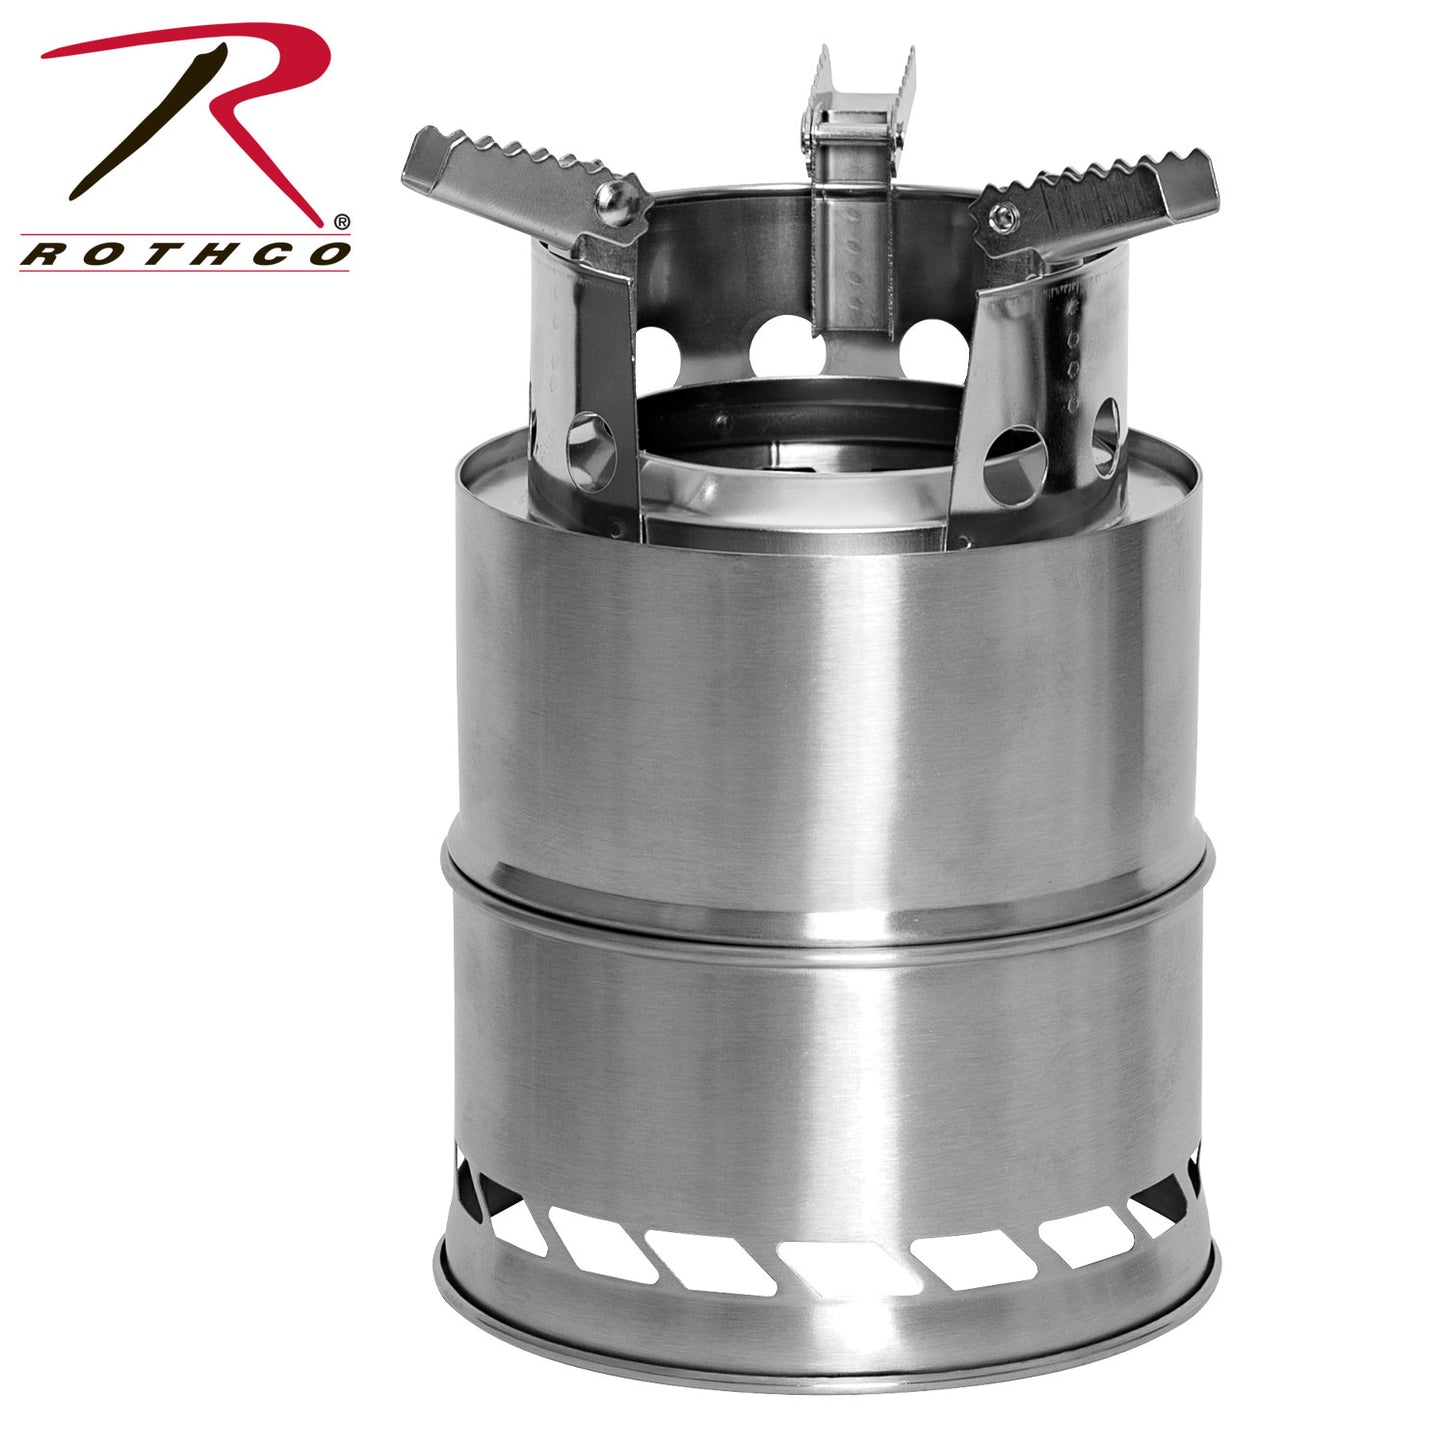 Rothco Stainless Steel Portable Camping / Backpacking Stove